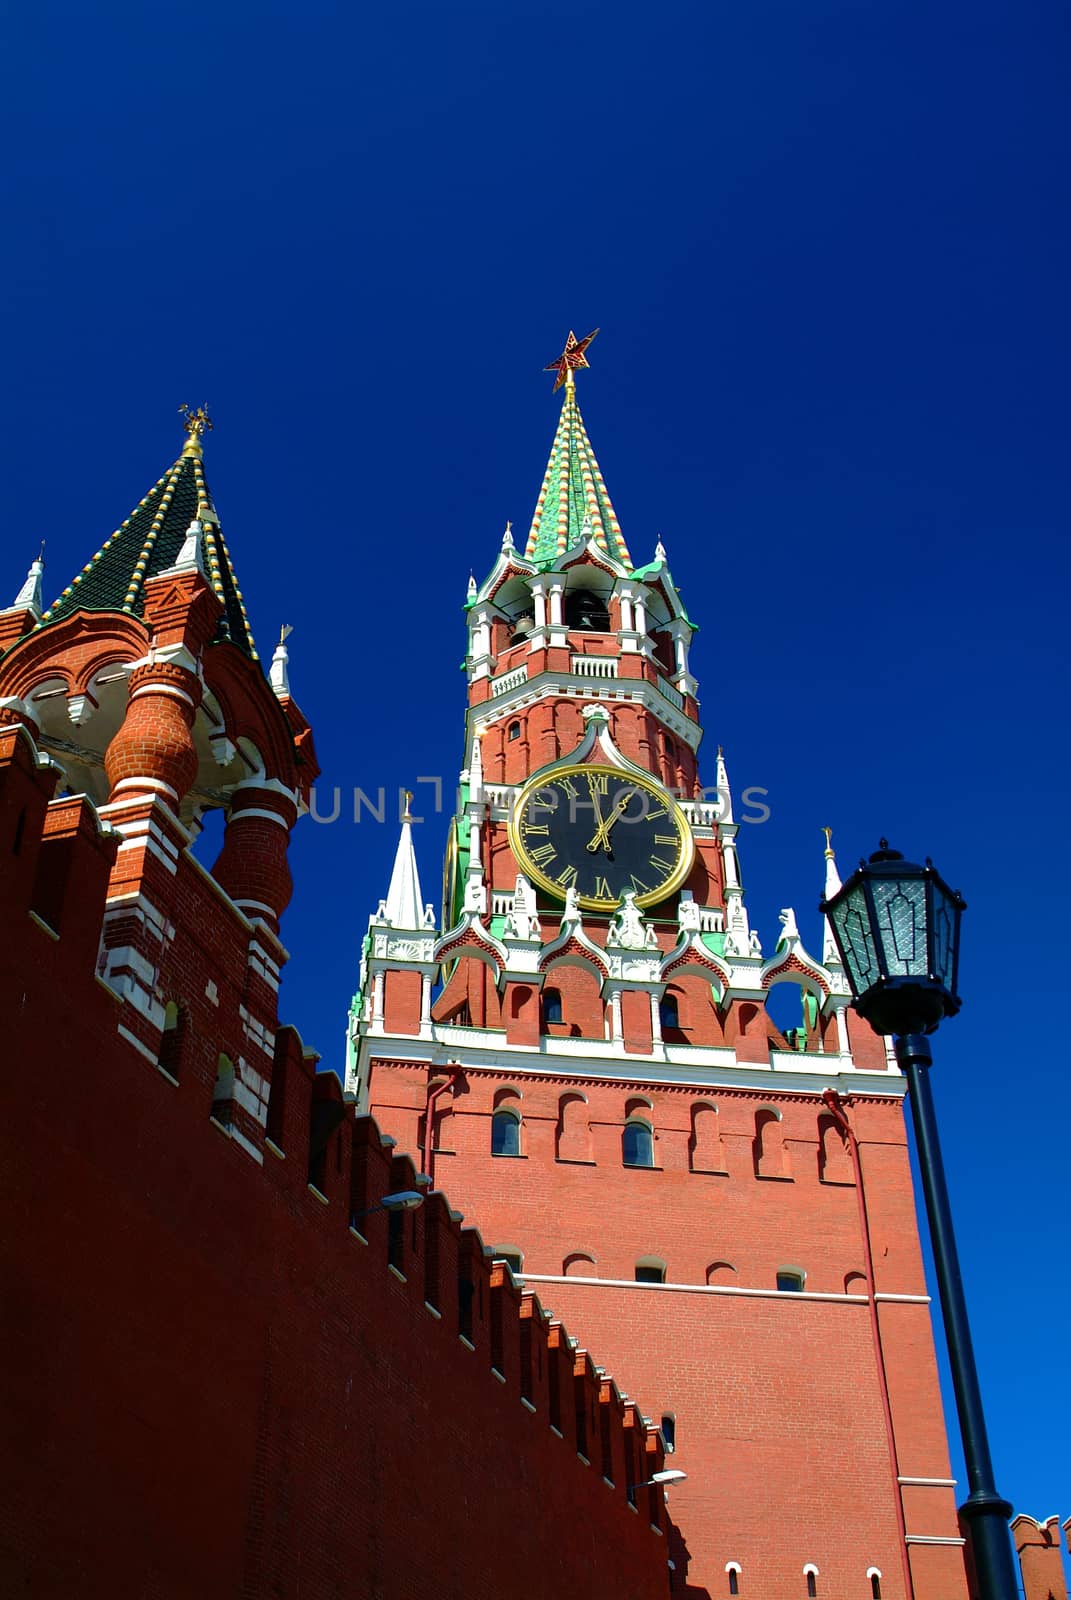 View on Moscow Red Square Kremlin tower Spasskaya Bashnya with Chiming Kuranti Clock. Moscow Kremlin Red Square best famous sightseeing places for tourist holidays vacations tours. Famous monuments